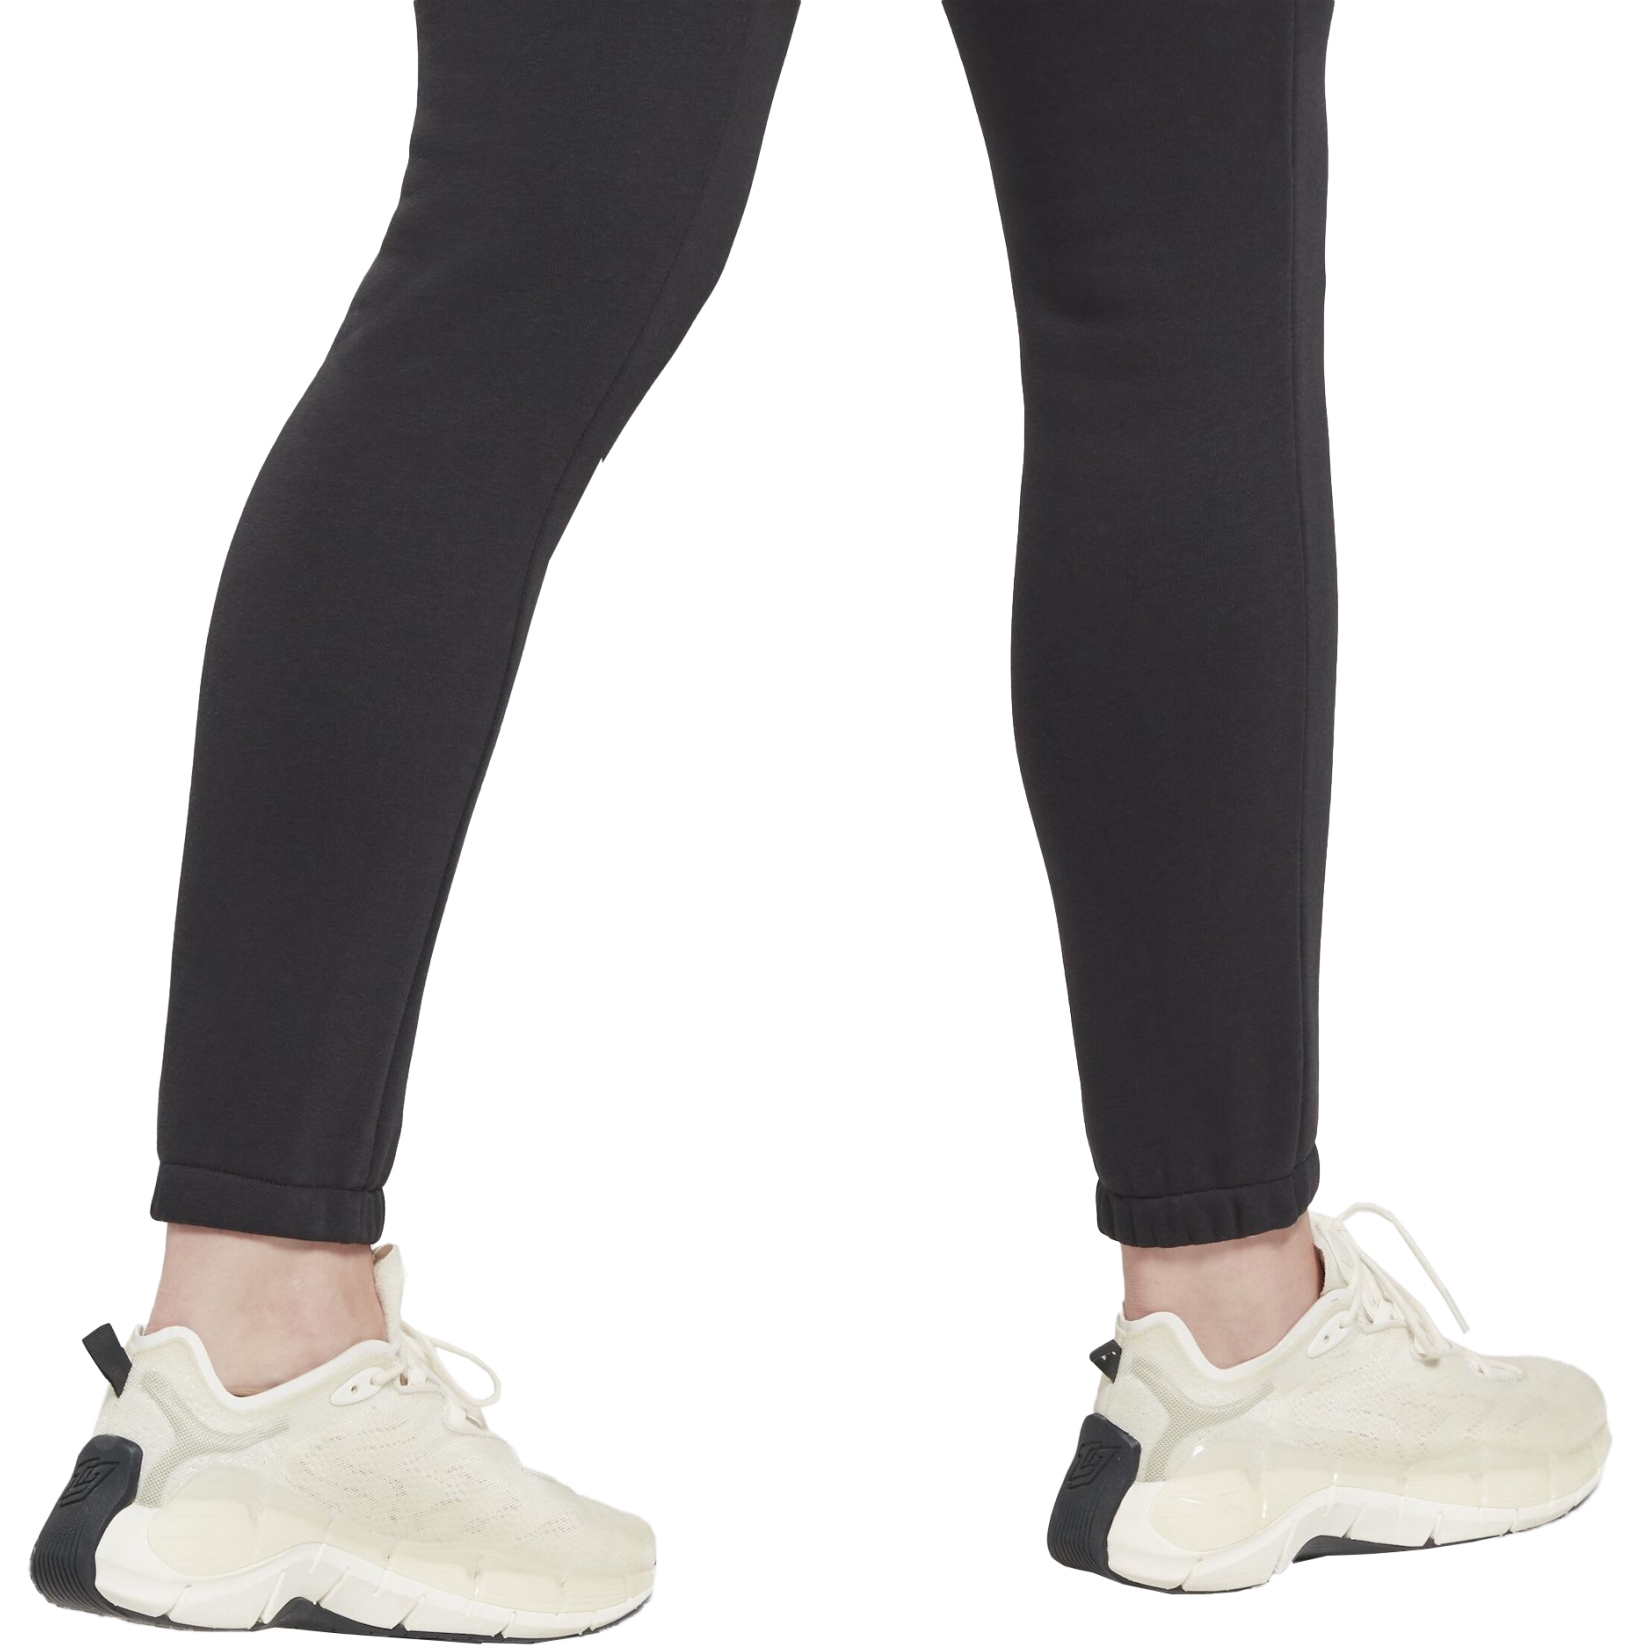 Reebok Lux High-Waisted Tights Women's - black